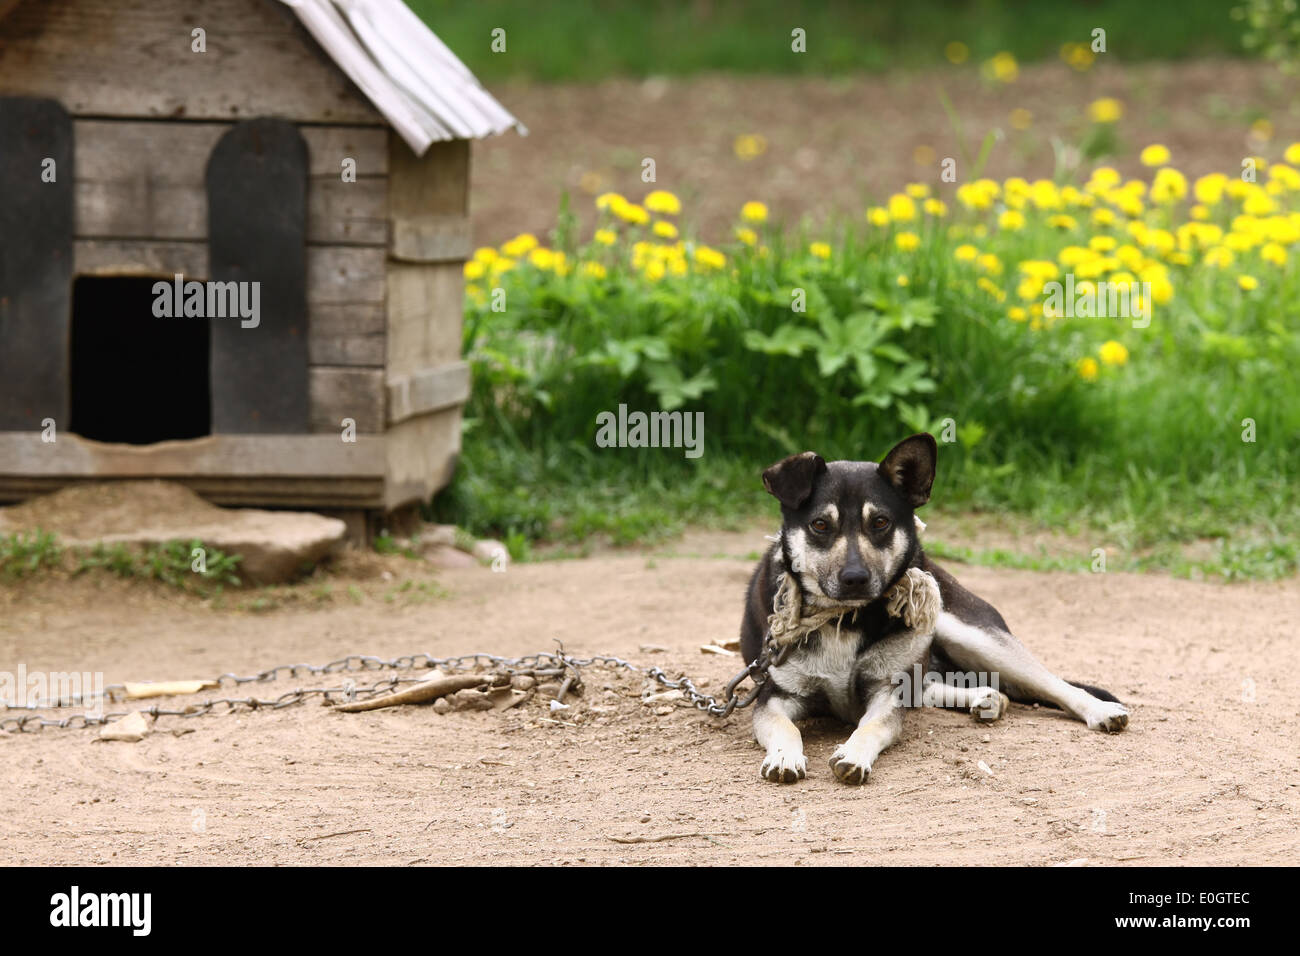 Dog sitting beside kennel in very poor rural environment Stock Photo